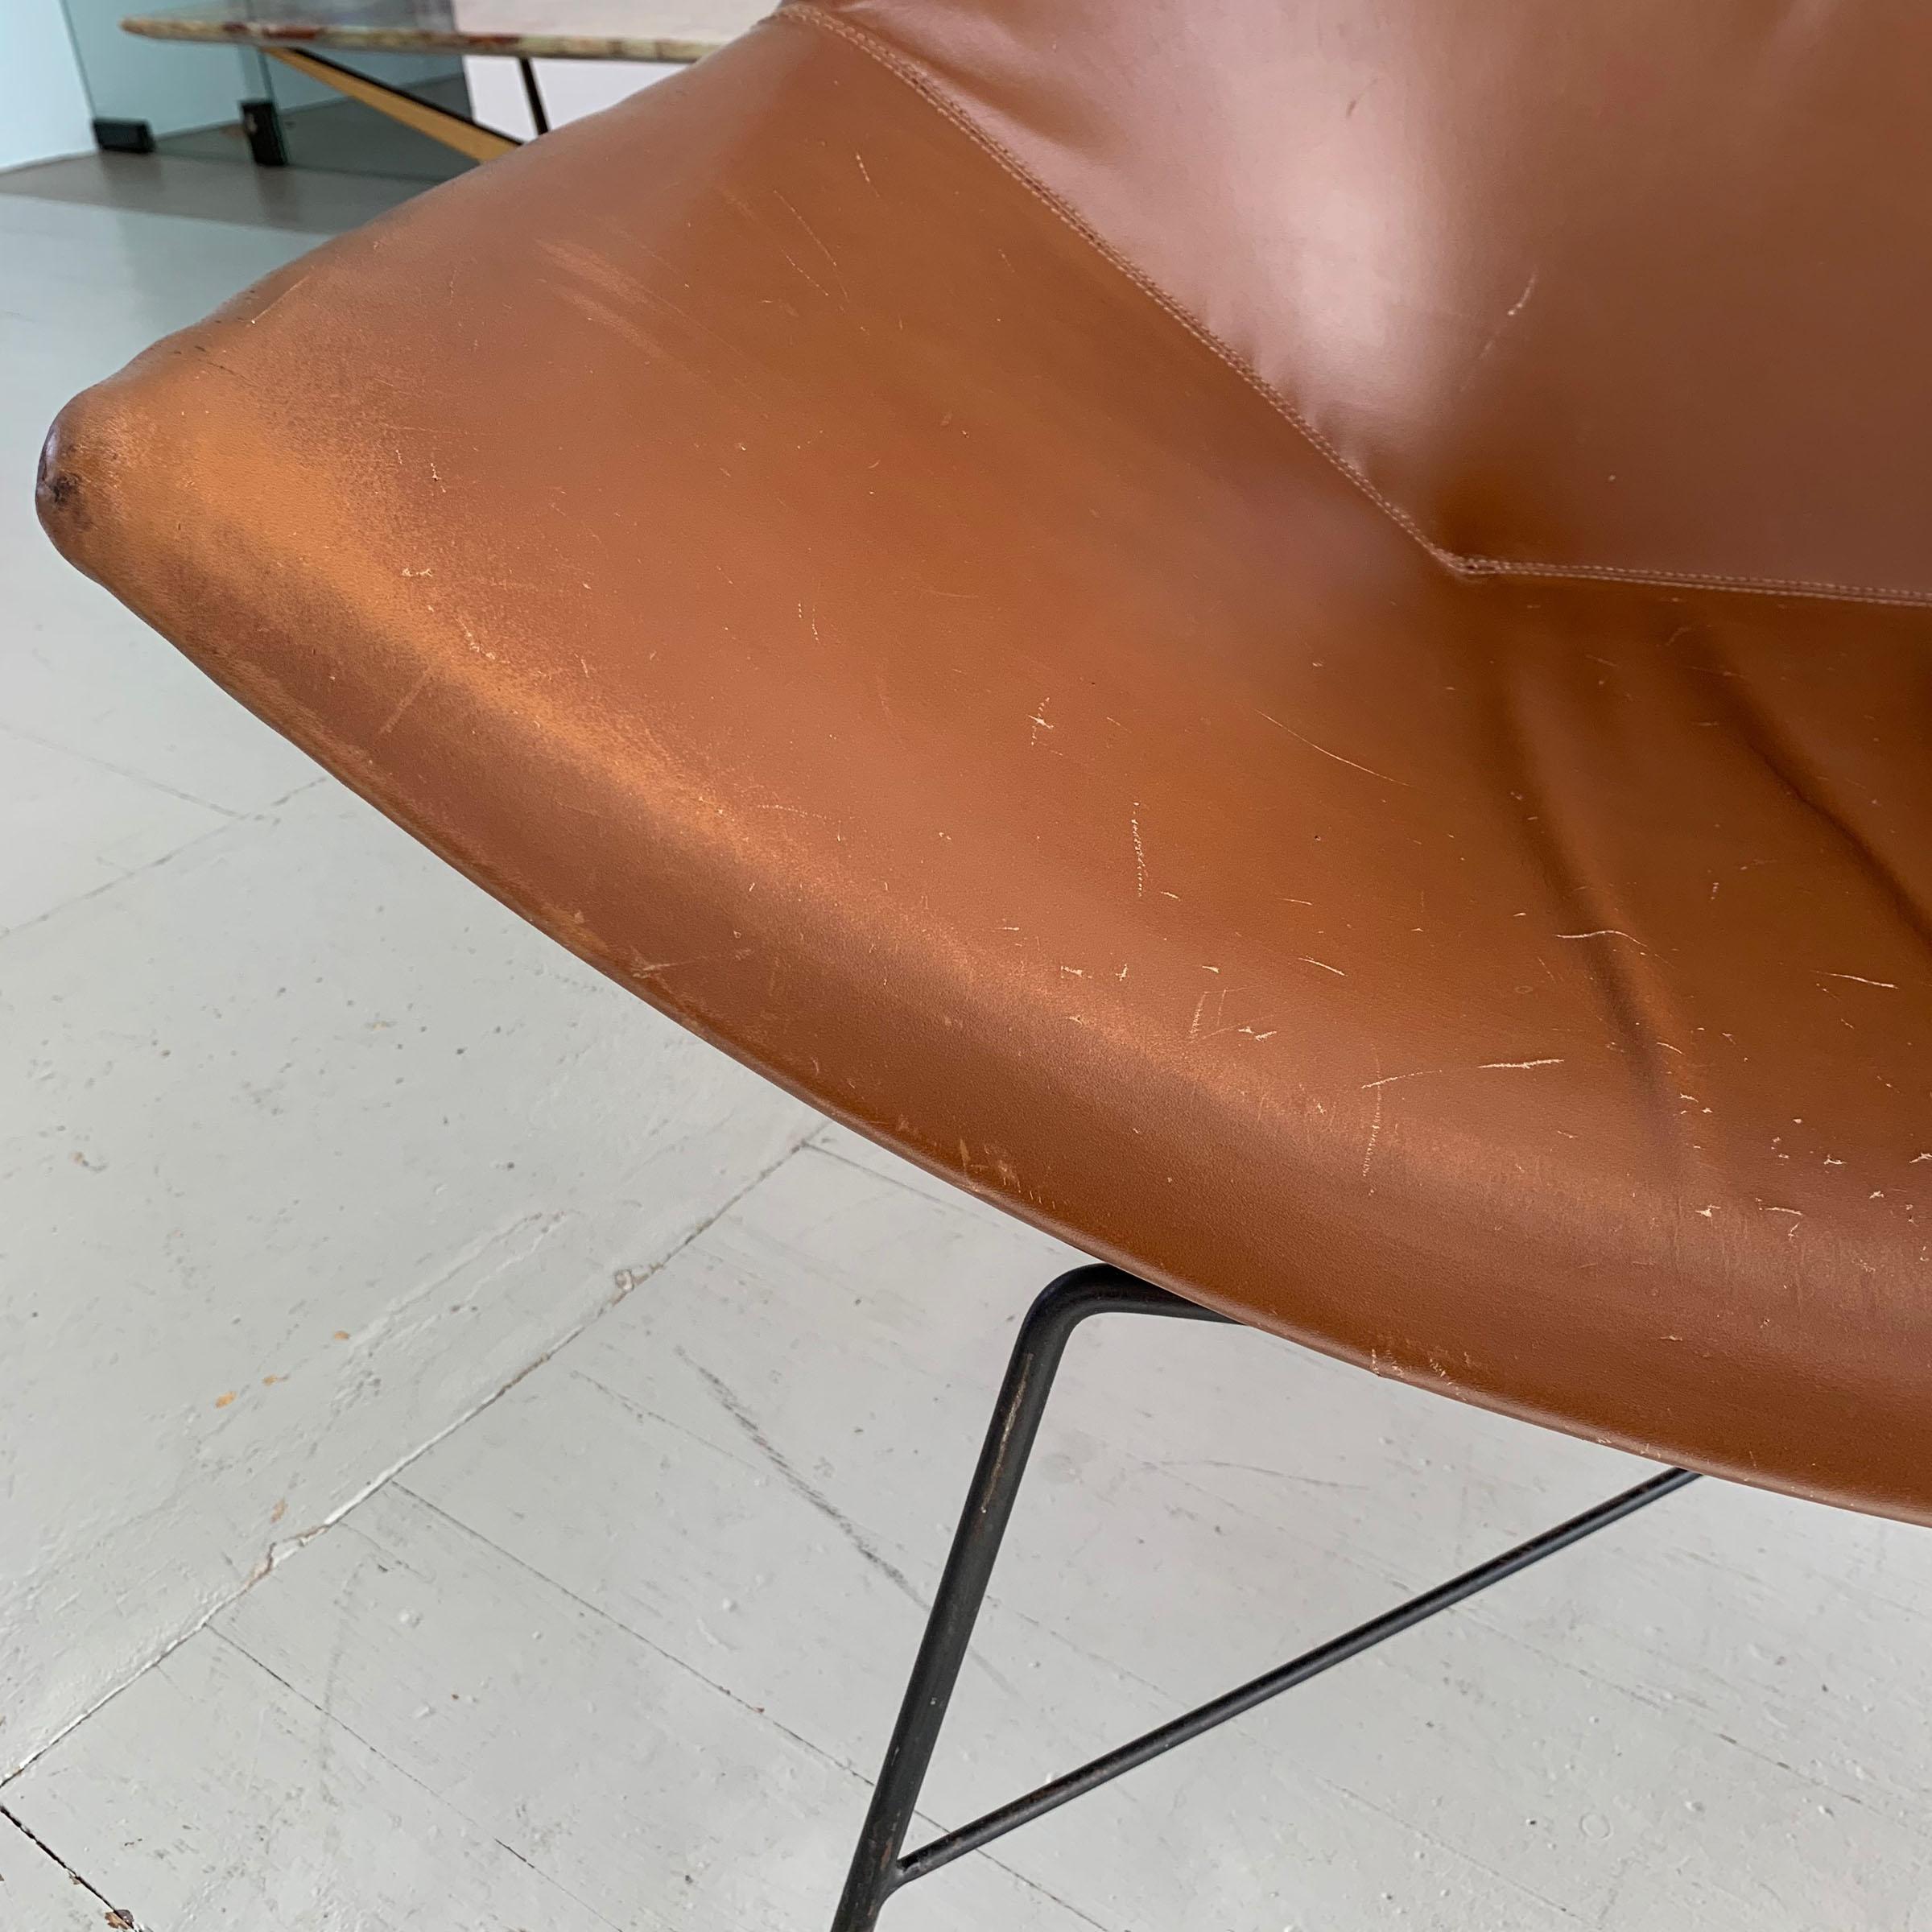 Italian Brown Leather Kosmos Chair Design by Augusto Bozzi for Saporiti, 1954 For Sale 2